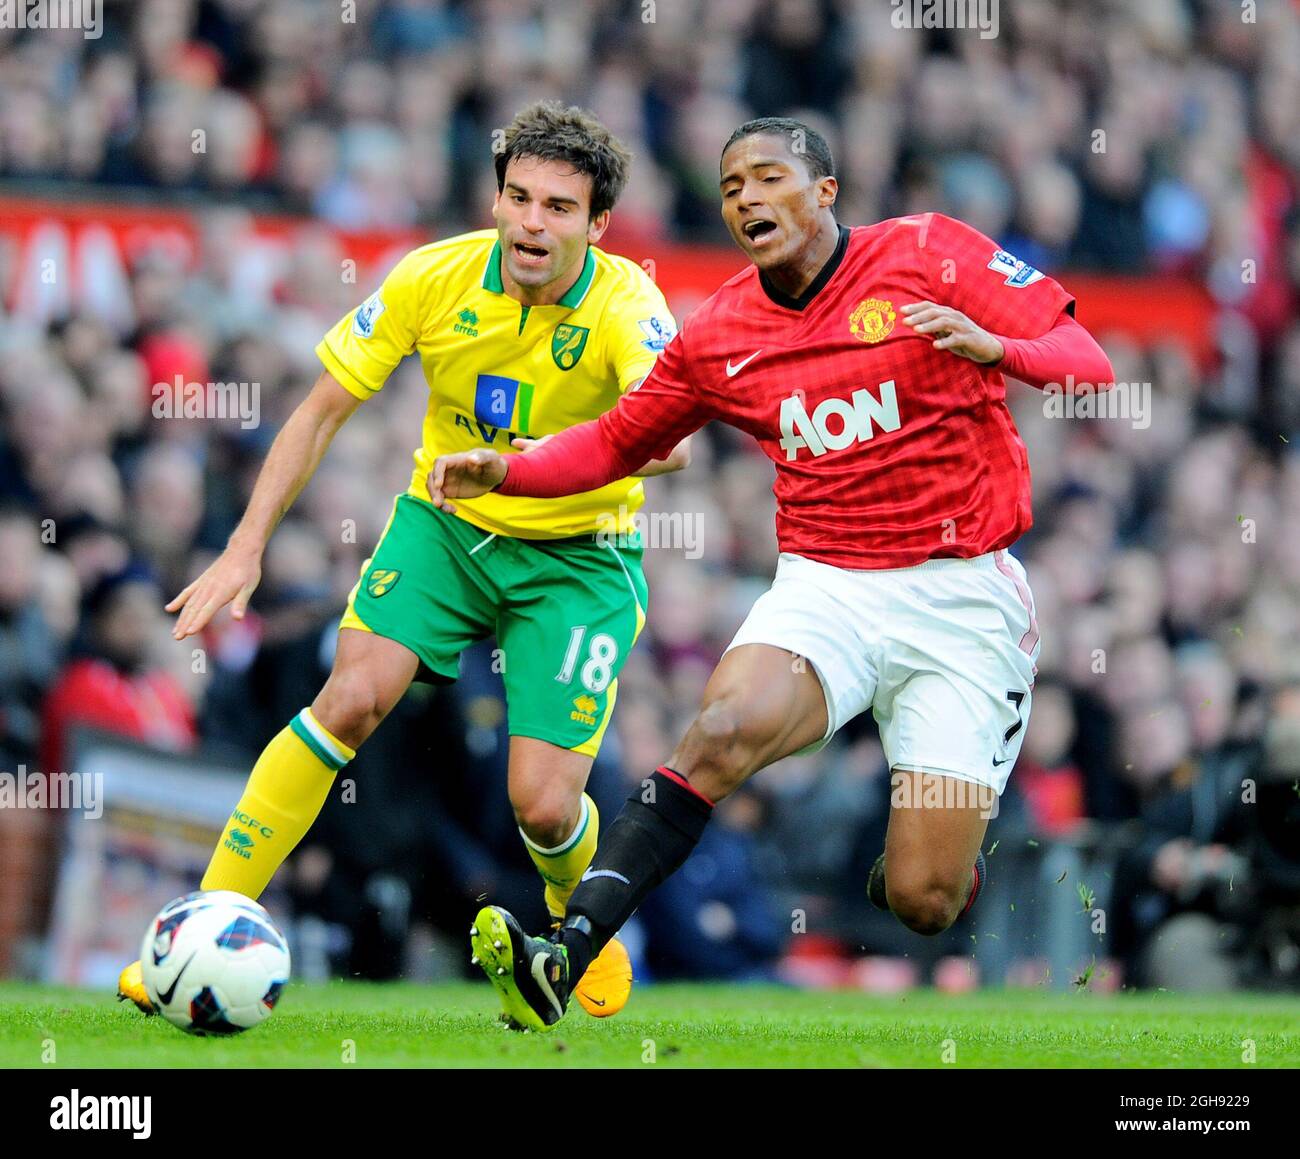 Javier Garrido of Norwich City brings down Luis Antonio Valencia of Manchester United during the Barclays Premier League match between Manchester United and Norwich City at the Old Trafford on March 02, 2013. Picture Simon Bellis Stock Photo